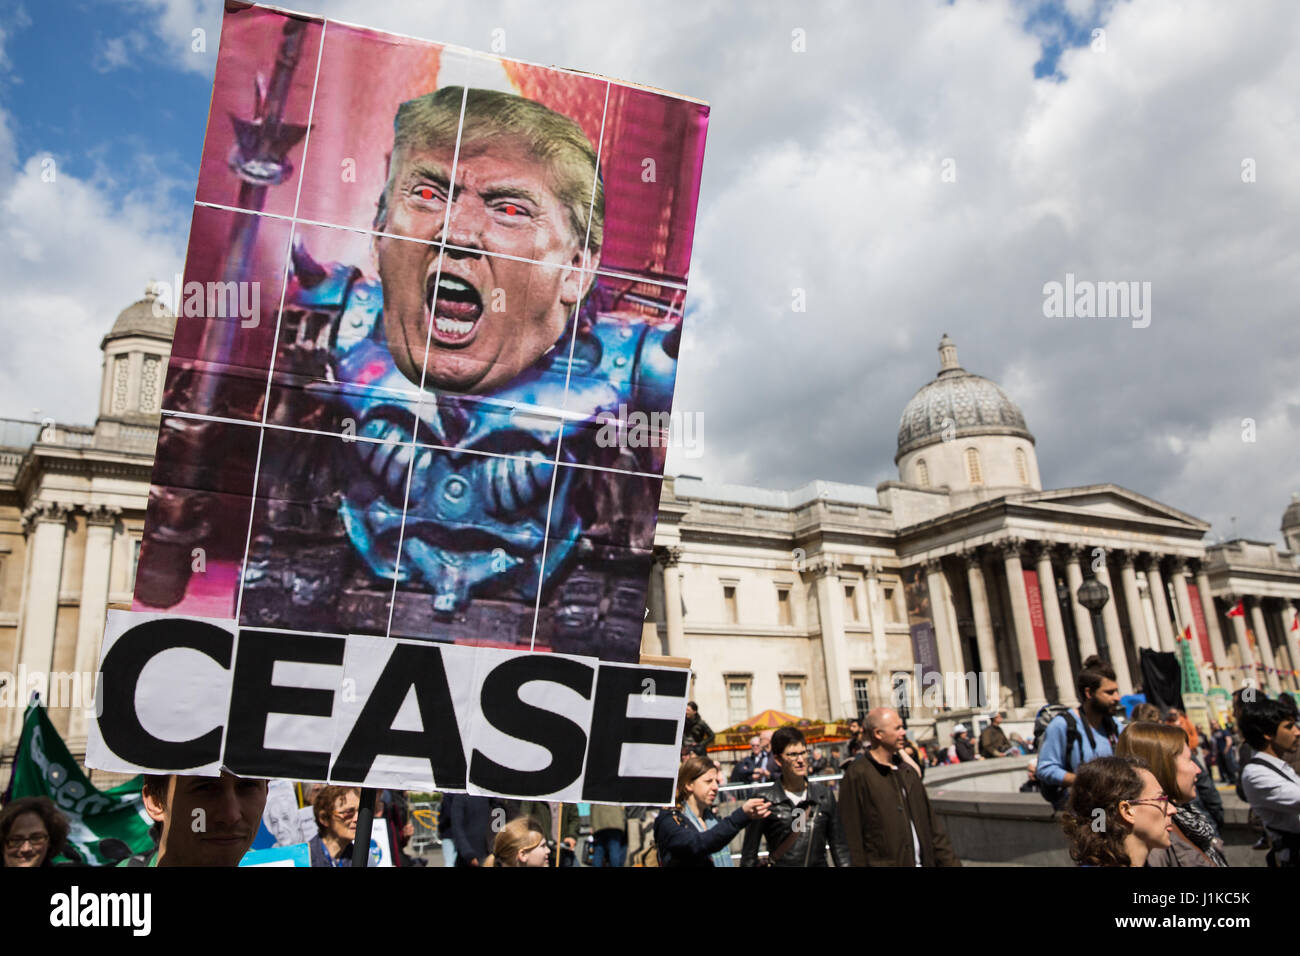 London, UK. 22nd April, 2017. Scientists march through central London on the ‘March for Science’ as part of a global protest march in the name of science. The organisers of the march, which took place on Earth Day, stated that science is ‘under attack’ from the administration of President Trump, with cuts to research funding into climate change and cancer and controversial statements by advisors such as Scott Pruitt, head of the US Environmental Protection Agency, who denied that carbon dioxide emissions are a primary cause of global warming. Stock Photo